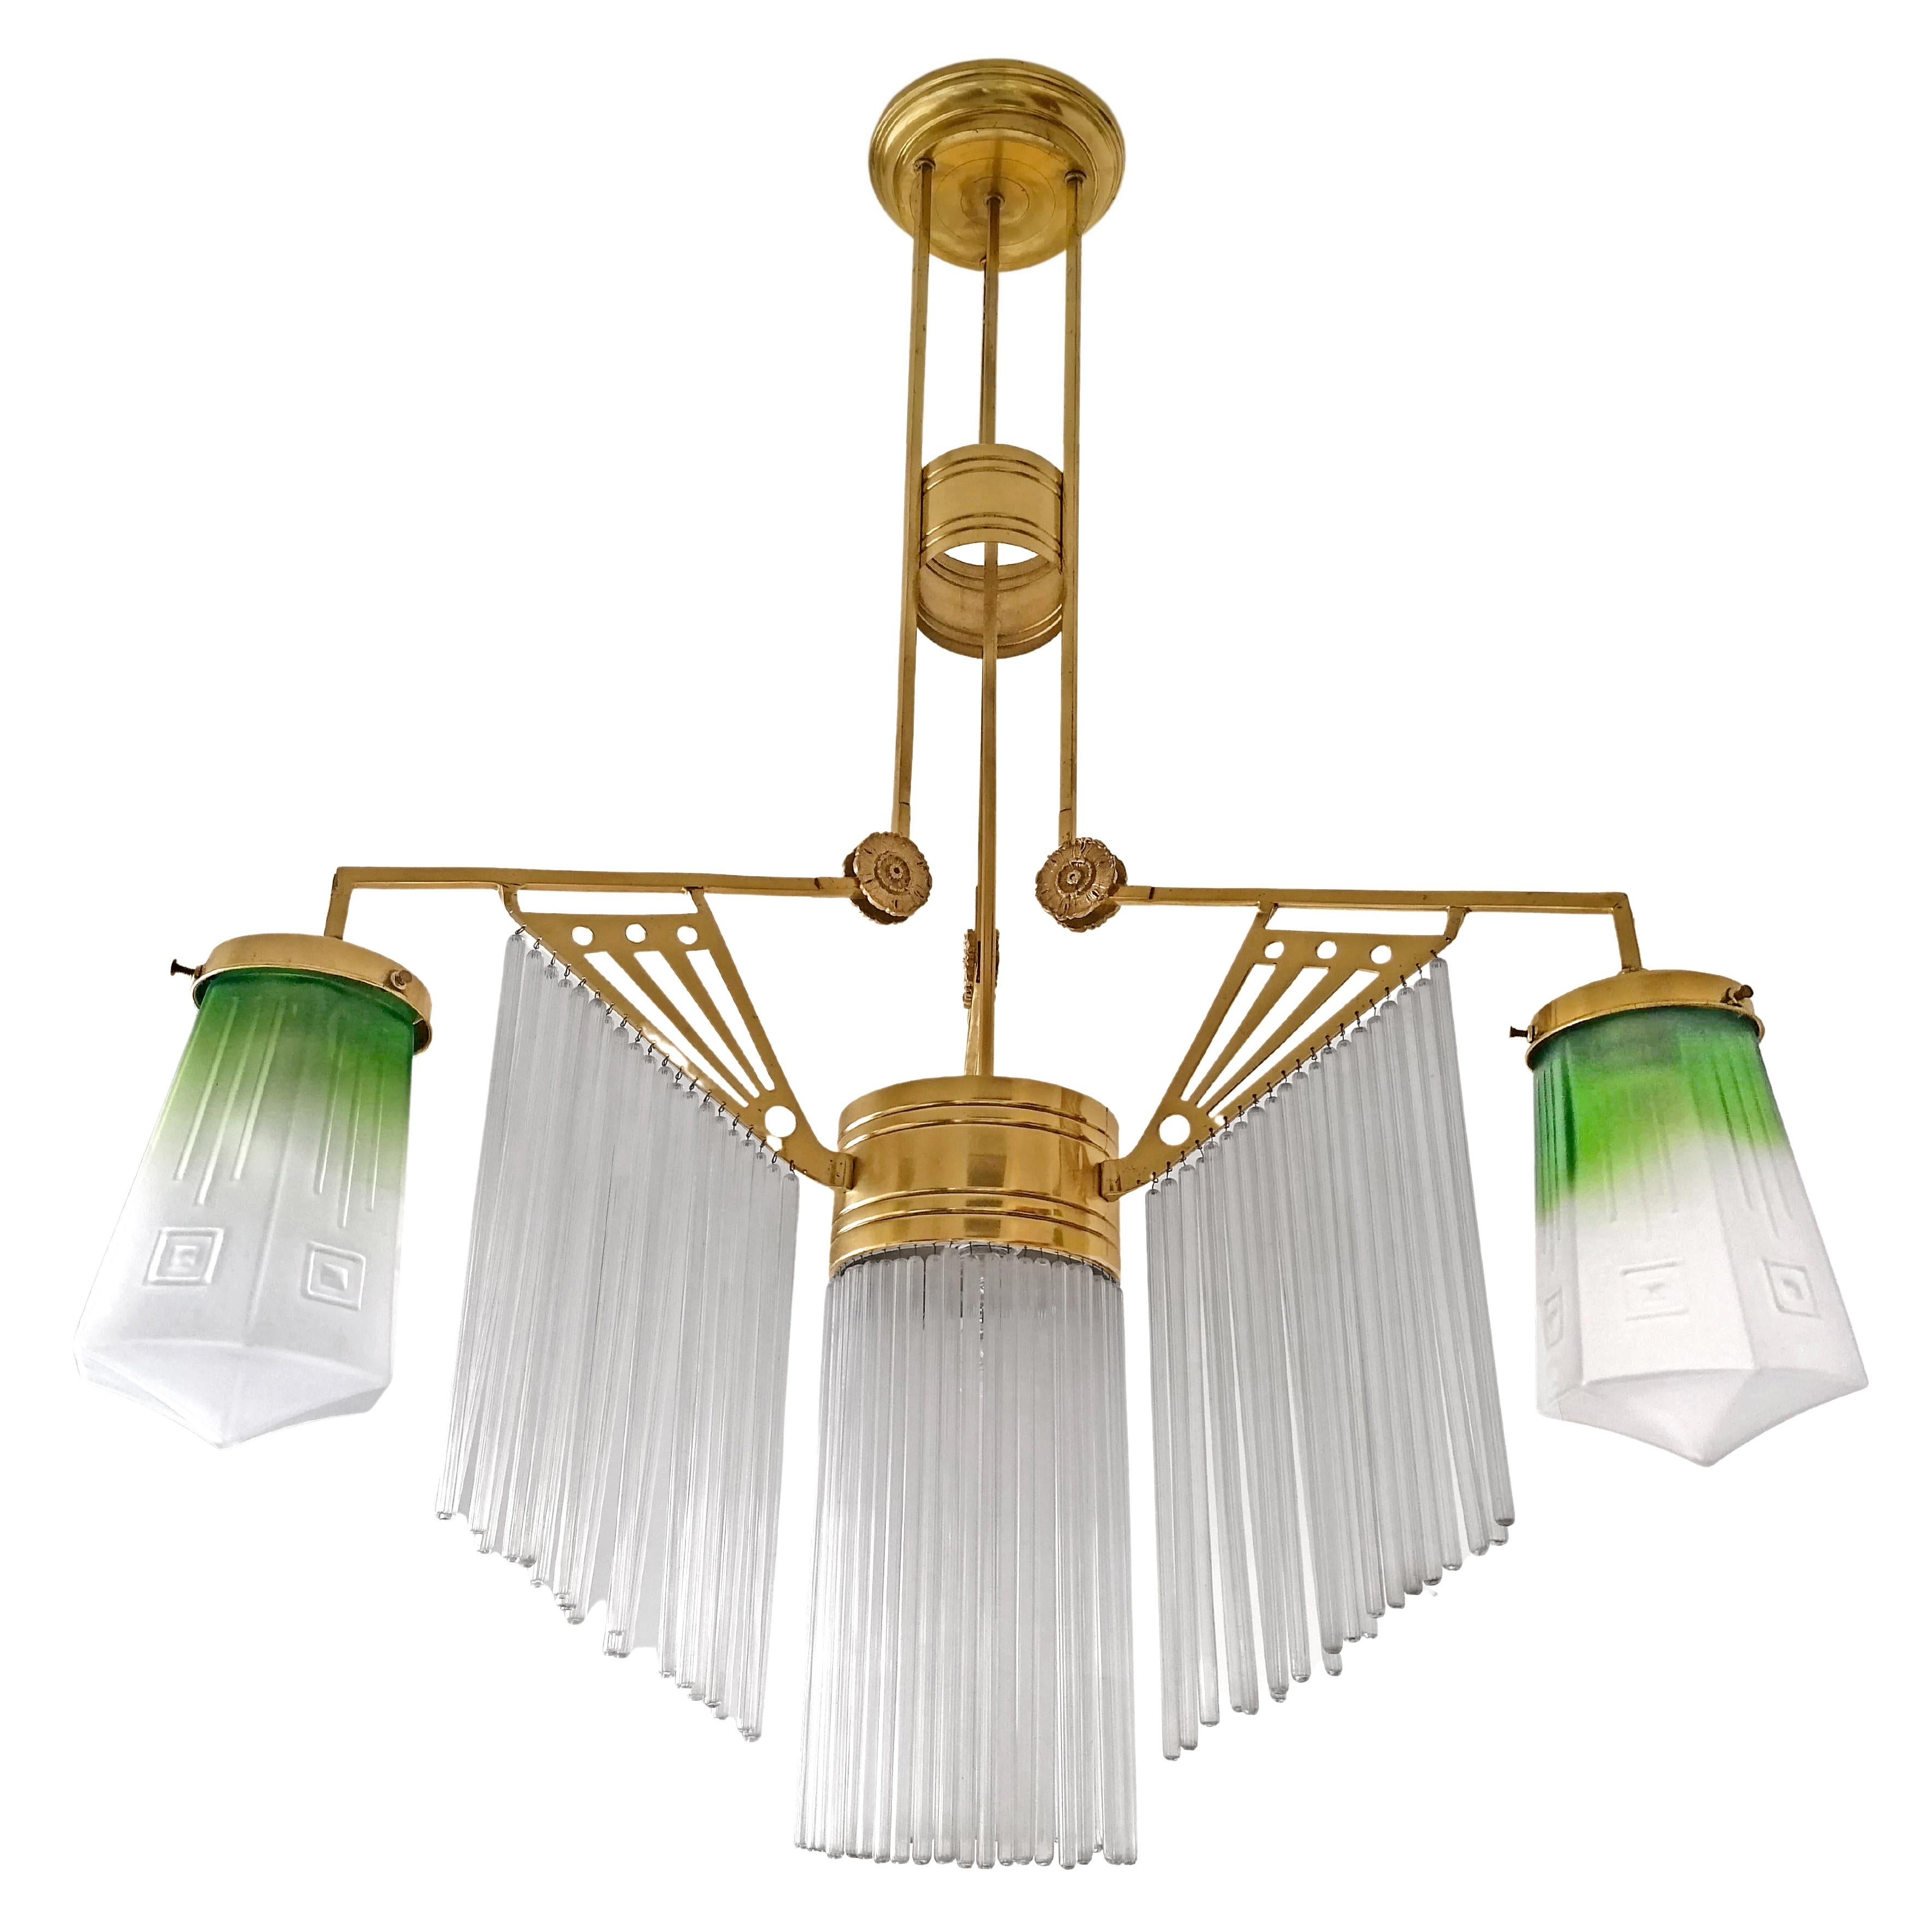 French Art Deco skyscraper chandelier in green glass, straws & gilt brass c1920
Superb and rare chandelier called 'Skyscraper' Art Deco, circa 1920. The glass globes are satin white and smoked green. The frame is made of Polished brass ornate with